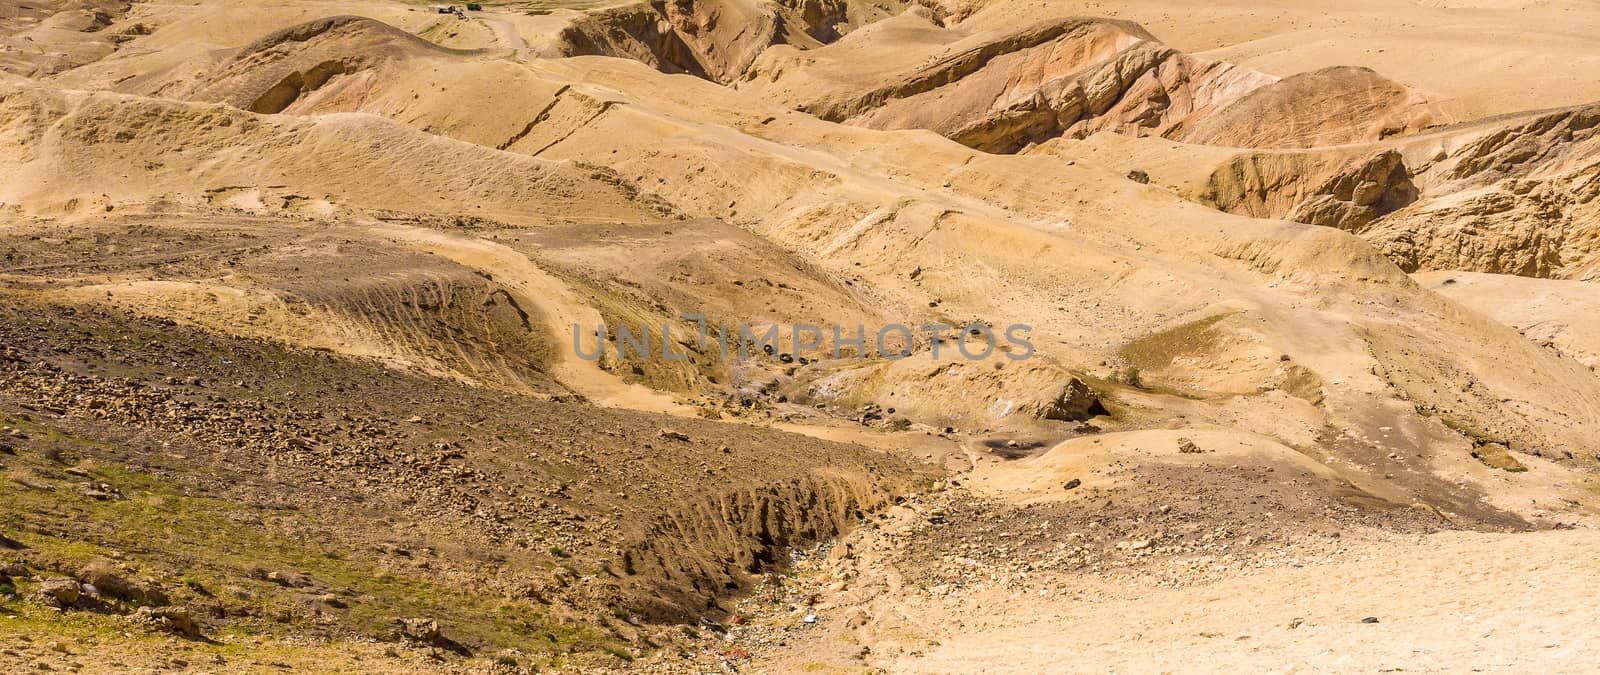 Stone desert in Jordan, hostile landscape next to the Kings Highway in front of Wadi Mujib, deeply cut into the landscape by geogif